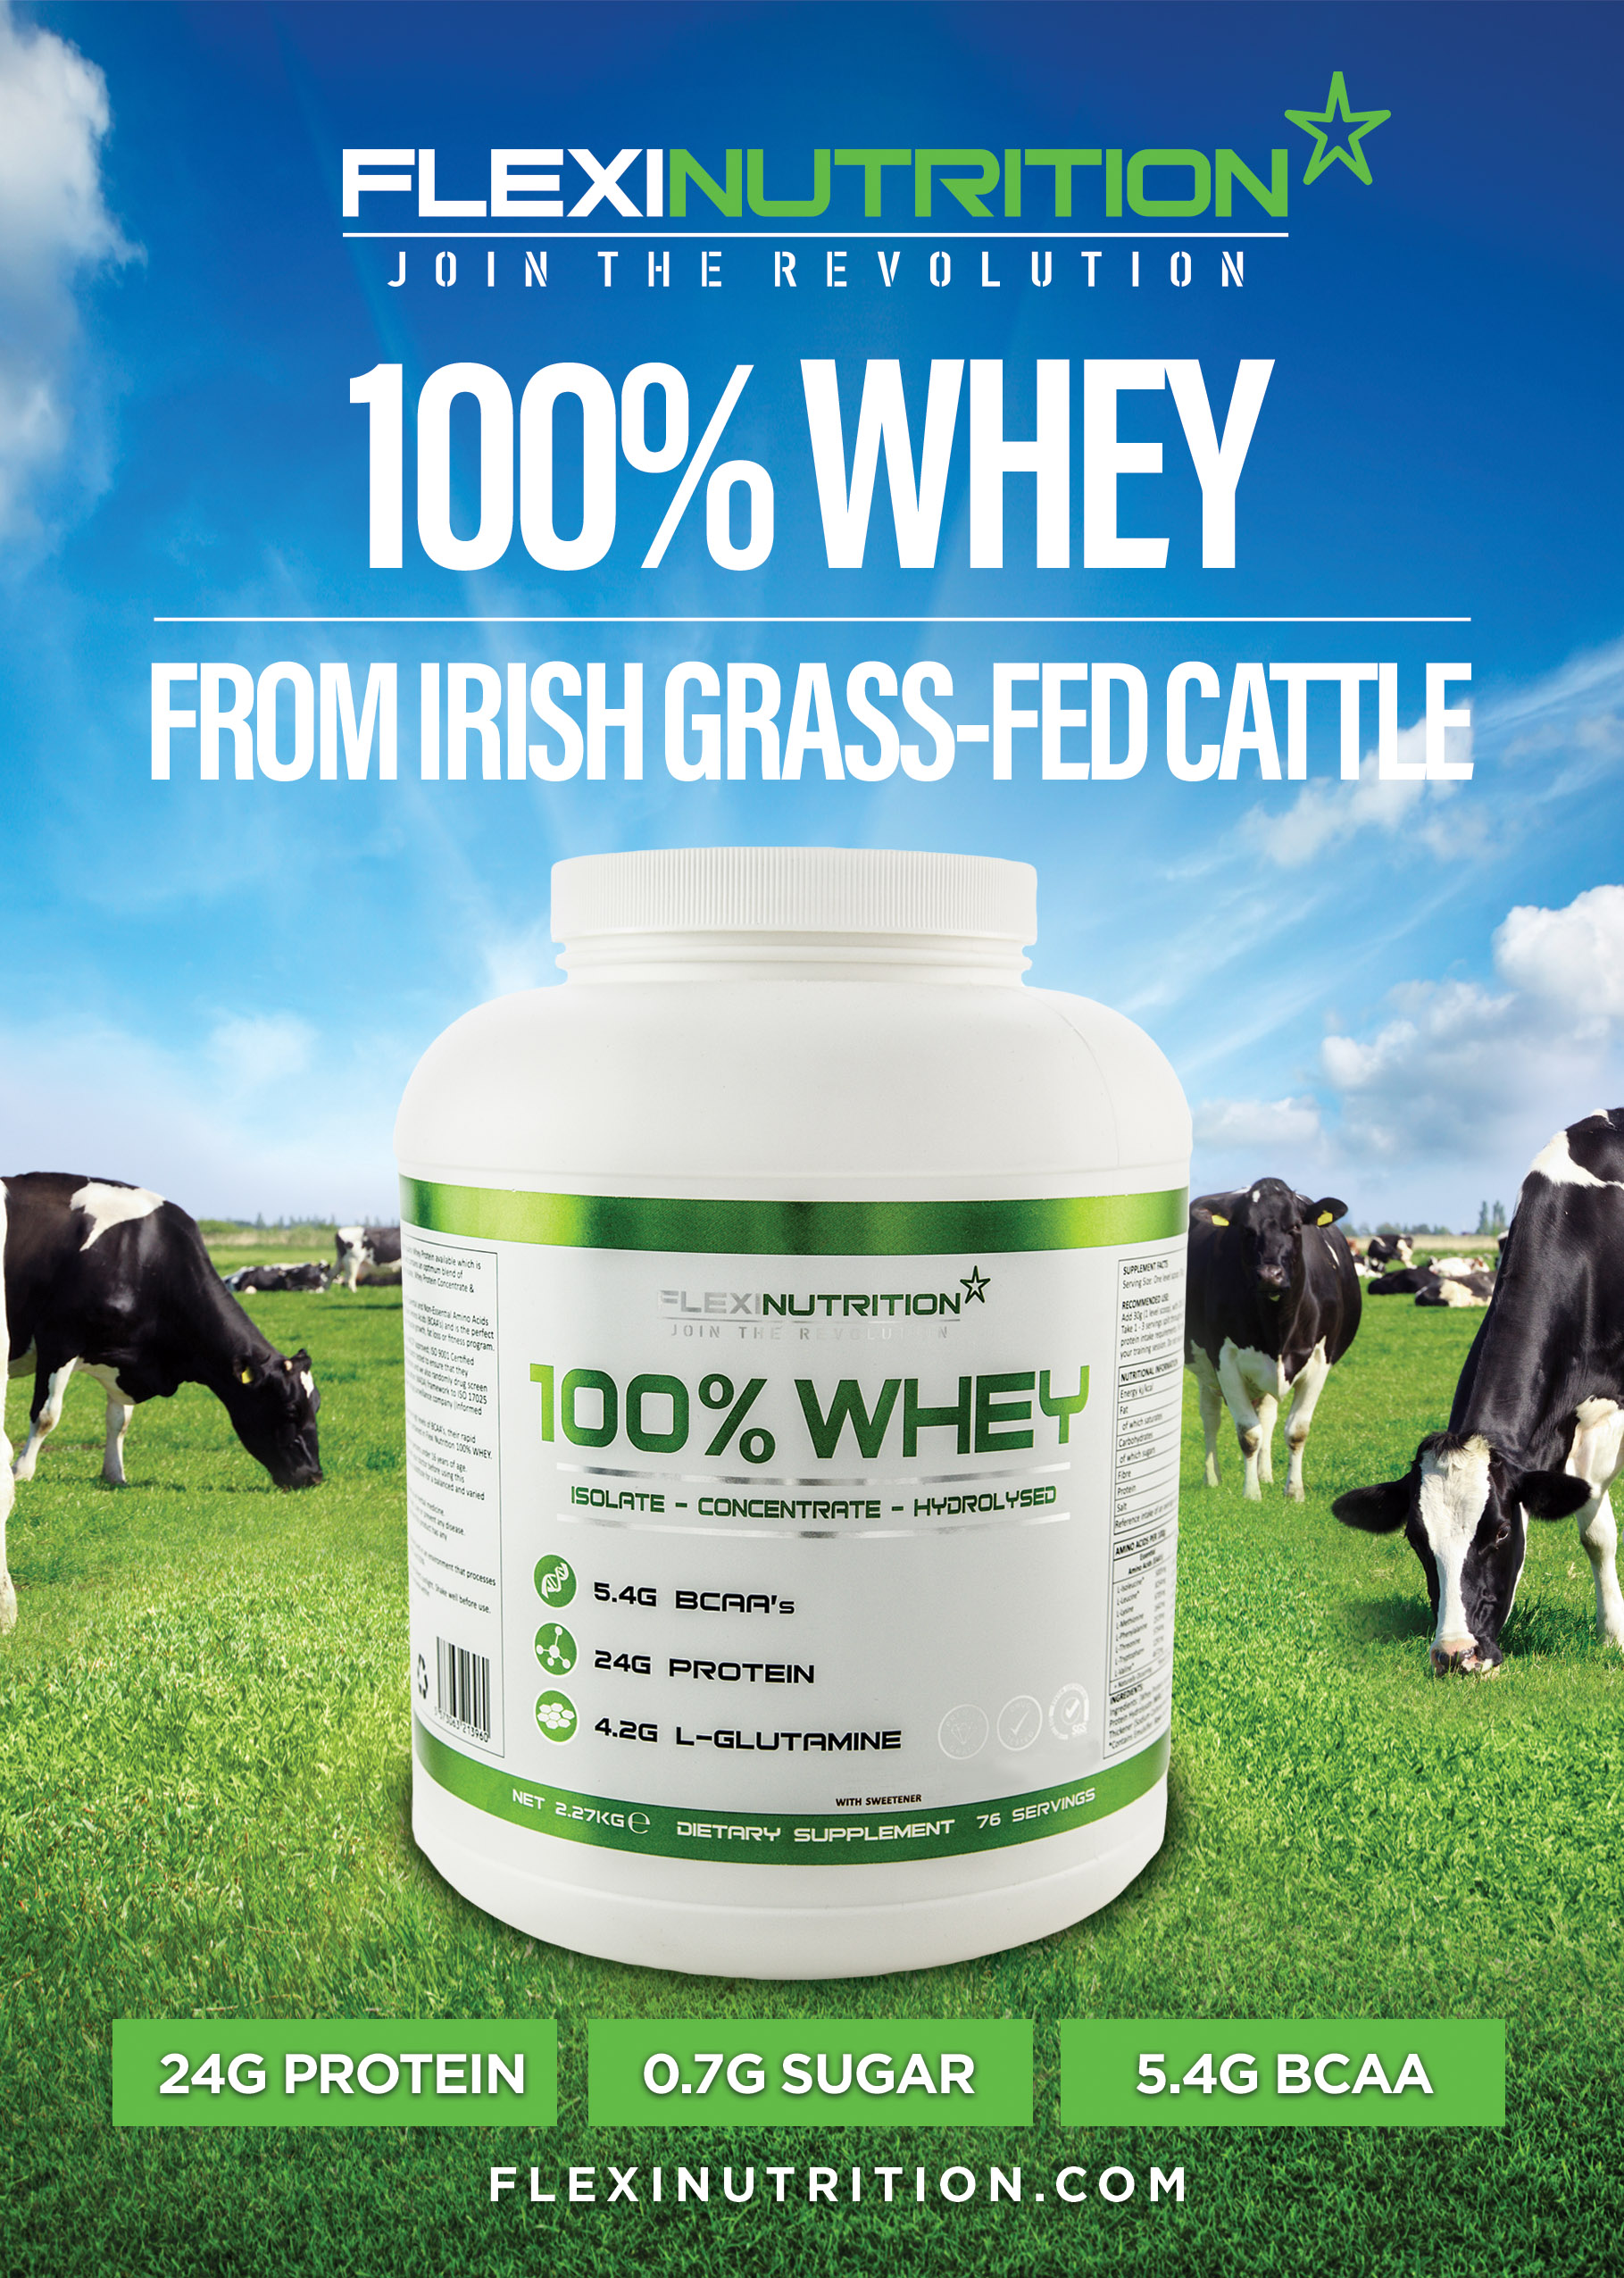 IRISH WHEY is manufactured from sustainably farmed, Irish Grass-Fed and Free-Range Whey Protein which is also Gluten and GMO Free. IRISH WHEY provides the perfect balance of essential and non-essential Amino Acids including a high concentration of Branch Chain Amino Acids (BCAAs). It is the perfect nutritional component to complement your muscle growth, fat loss or fitness program. Great taste and mixability.
